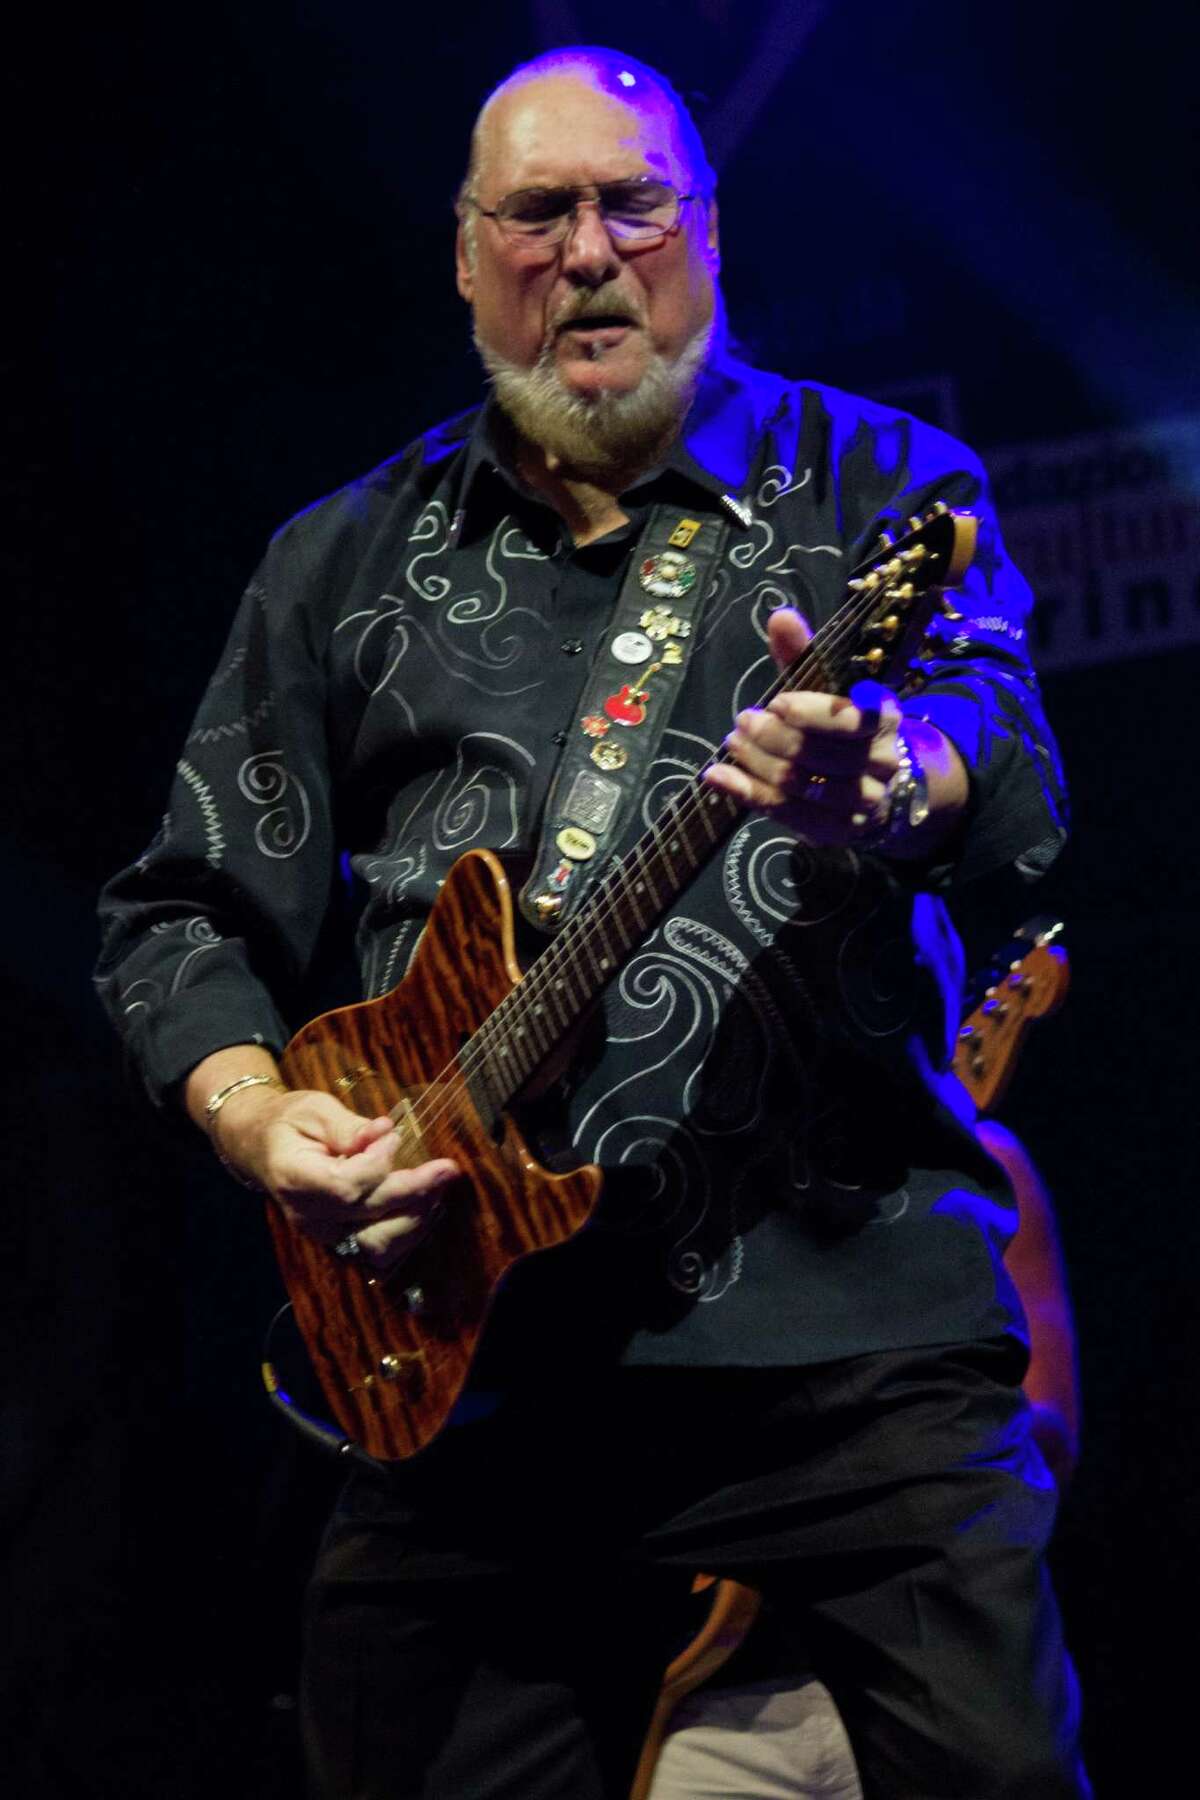 Steve Cropper, member of the Blues Brothers band, donated guitars to the Smithsonian for its Memphis Sound collection.